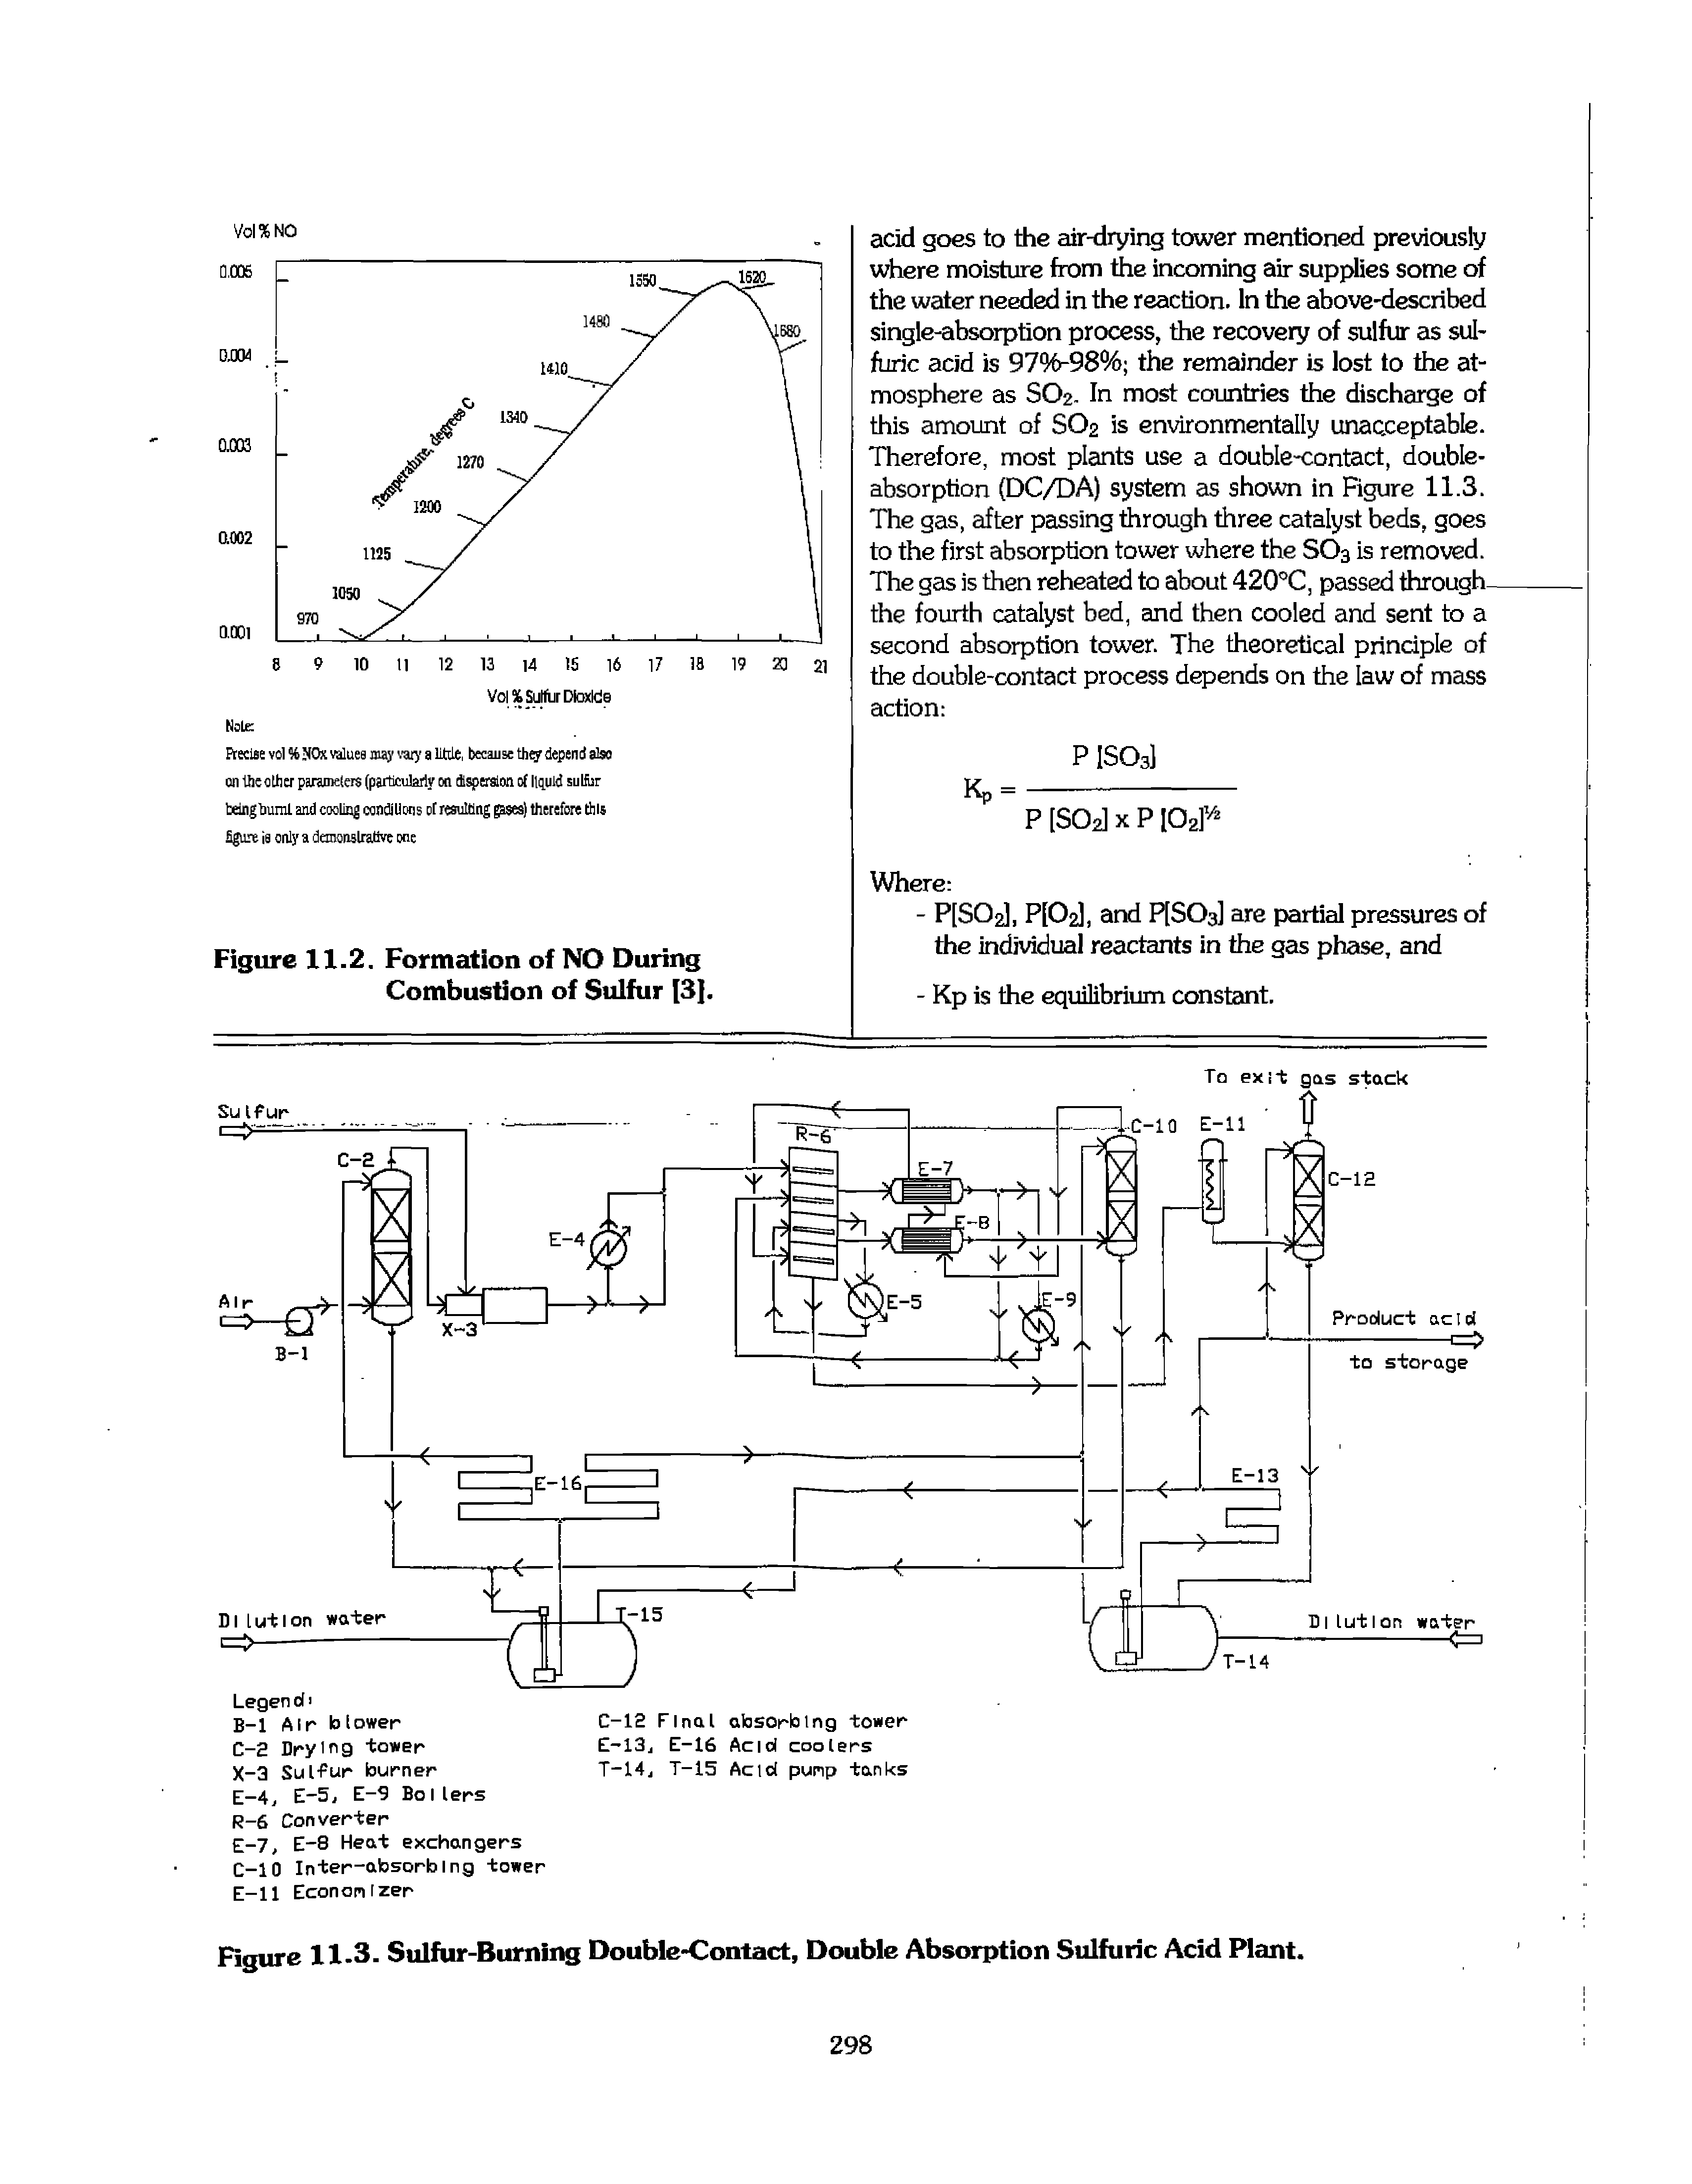 Figure 11.3. Sulfur-Bunting Double-Contact, Double Absorption Sulfuric Acid Plant.